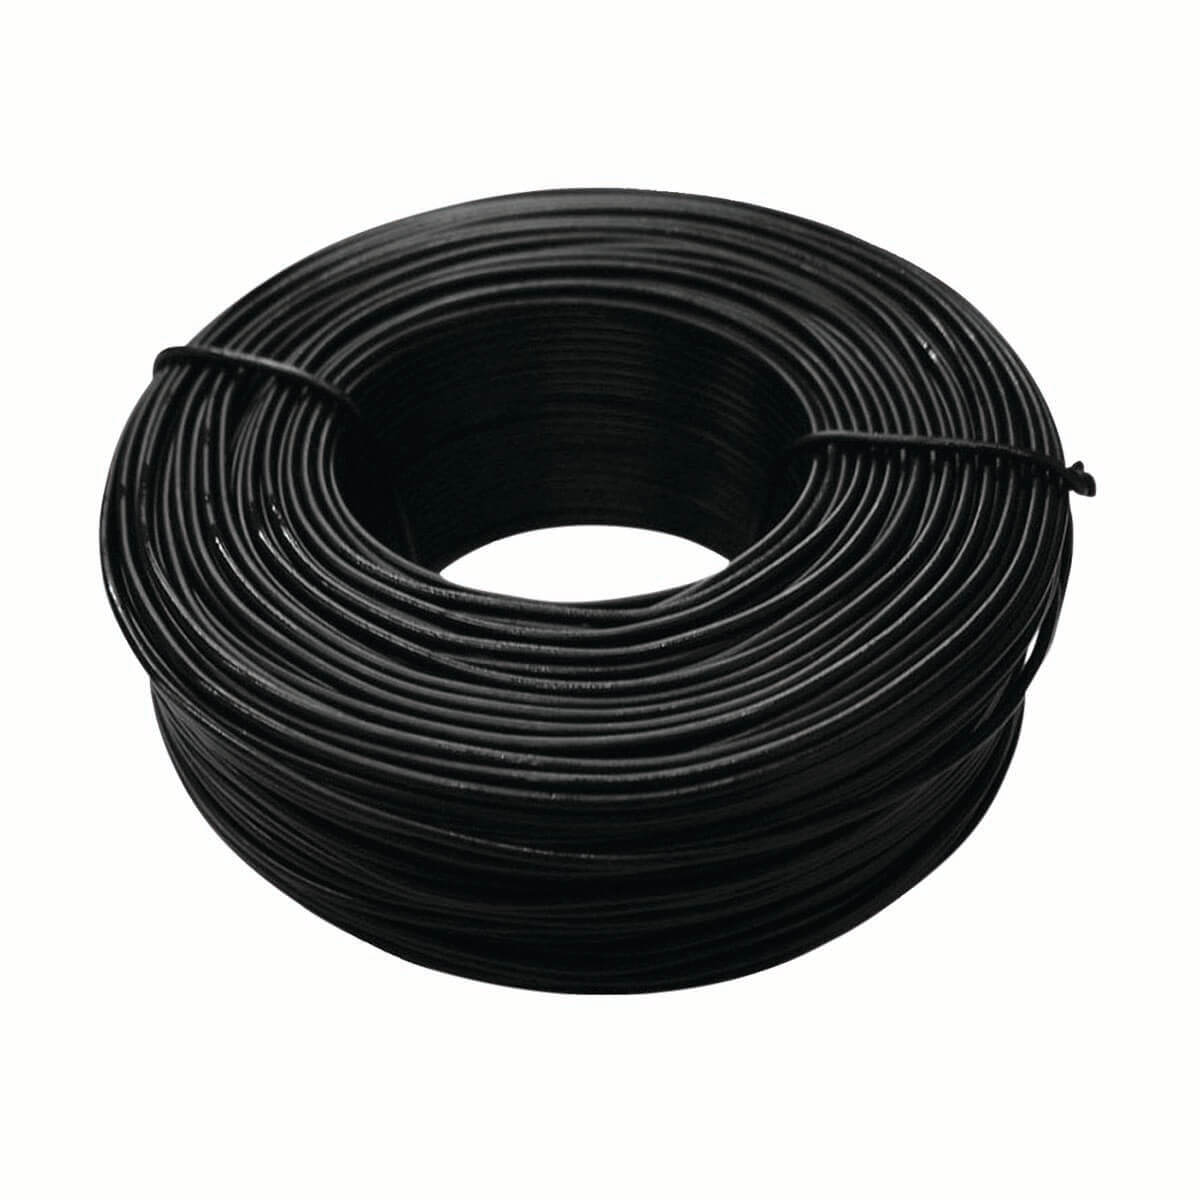 Tie Wire - 300-ft Coil